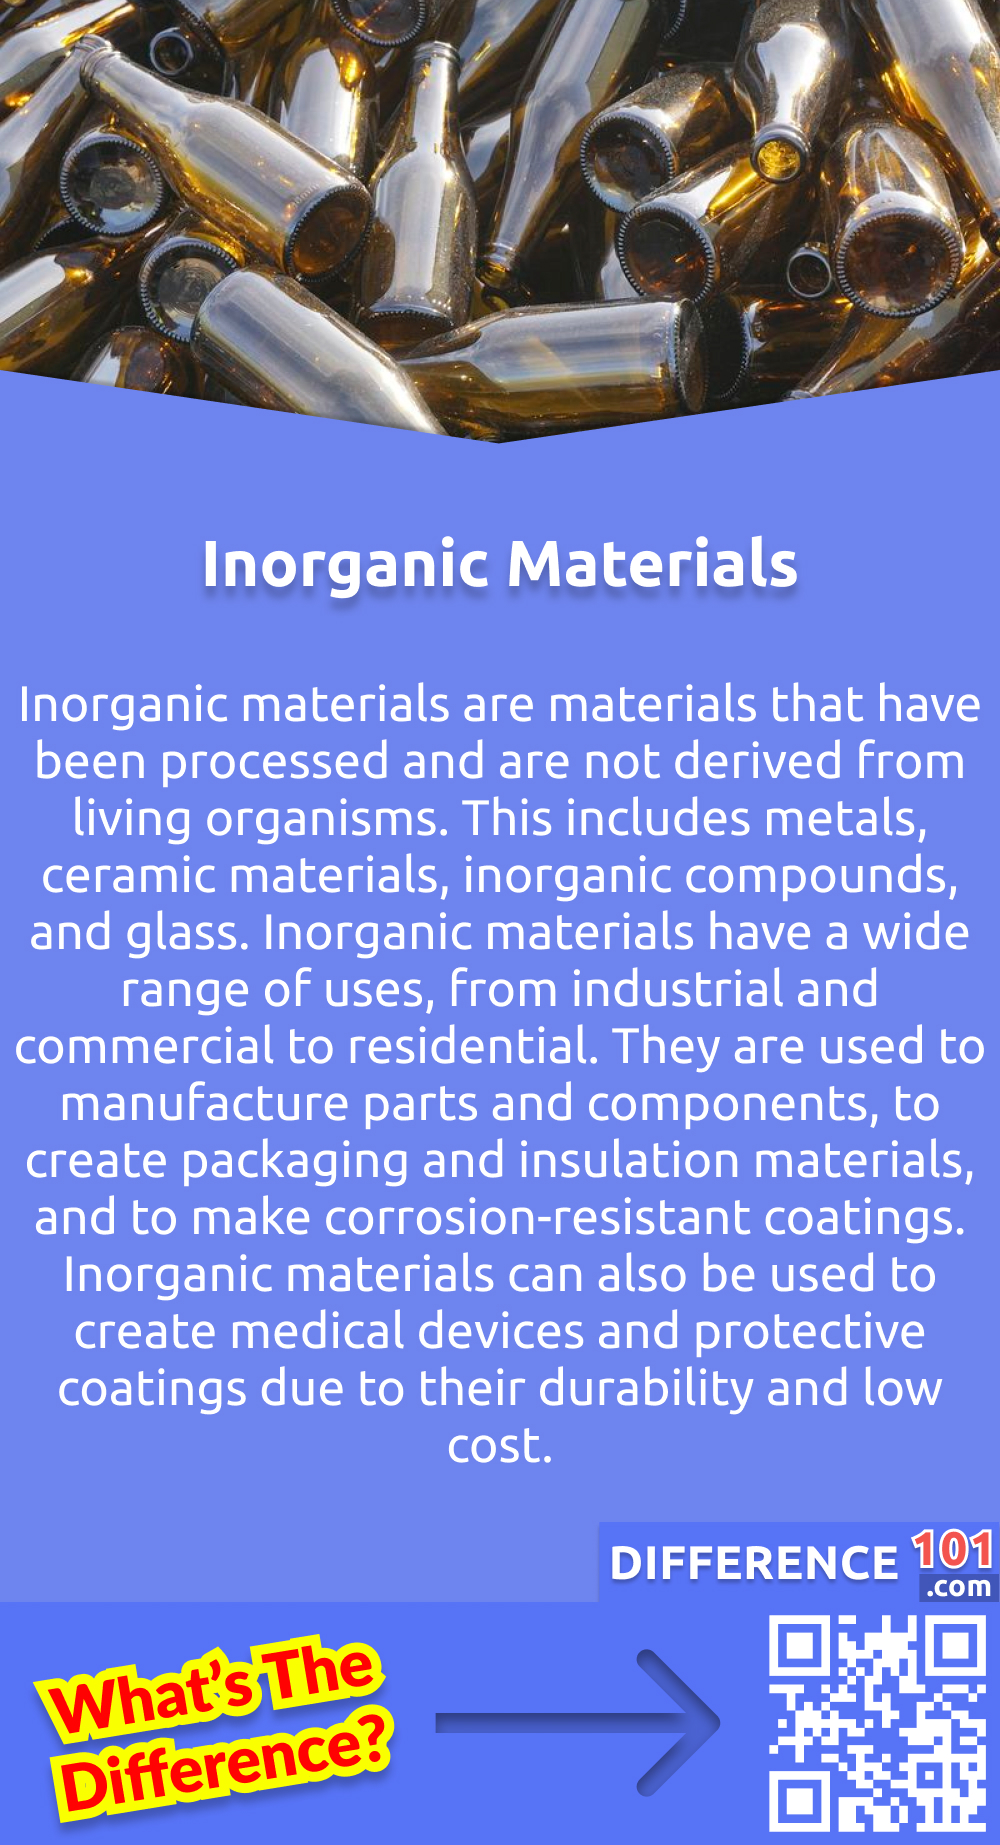 What Is Inorganic Materials? Inorganic materials are materials that have been processed and are not derived from living organisms. This includes metals, ceramic materials, inorganic compounds, and glass. Inorganic materials have a wide range of uses, from industrial and commercial to residential. They are used to manufacture parts and components, to create packaging and insulation materials, and to make corrosion-resistant coatings. Inorganic materials can also be used to create medical devices and protective coatings due to their durability and low cost. In addition to their use in industrial applications, inorganic materials are also used in paints, cleaners, and in construction materials such as concrete. Inorganic materials have excellent properties, making them a popular choice for many applications.